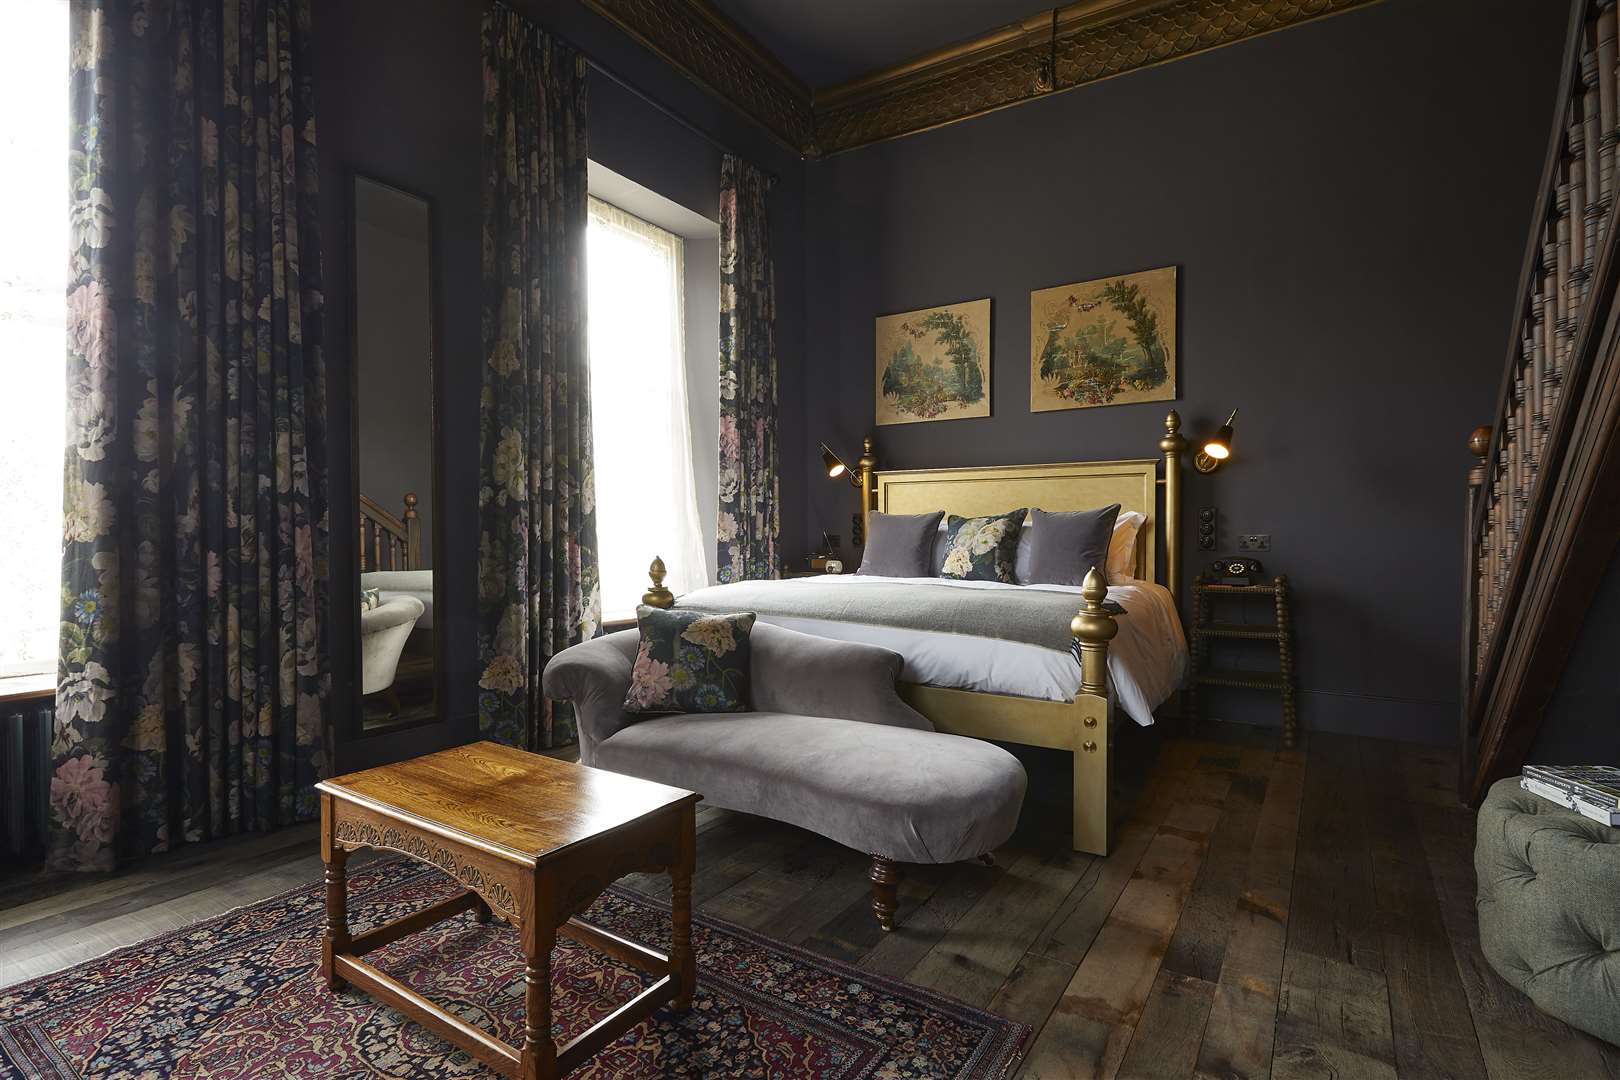 The bedrooms are comfy and cosy with sumptuous furnishings